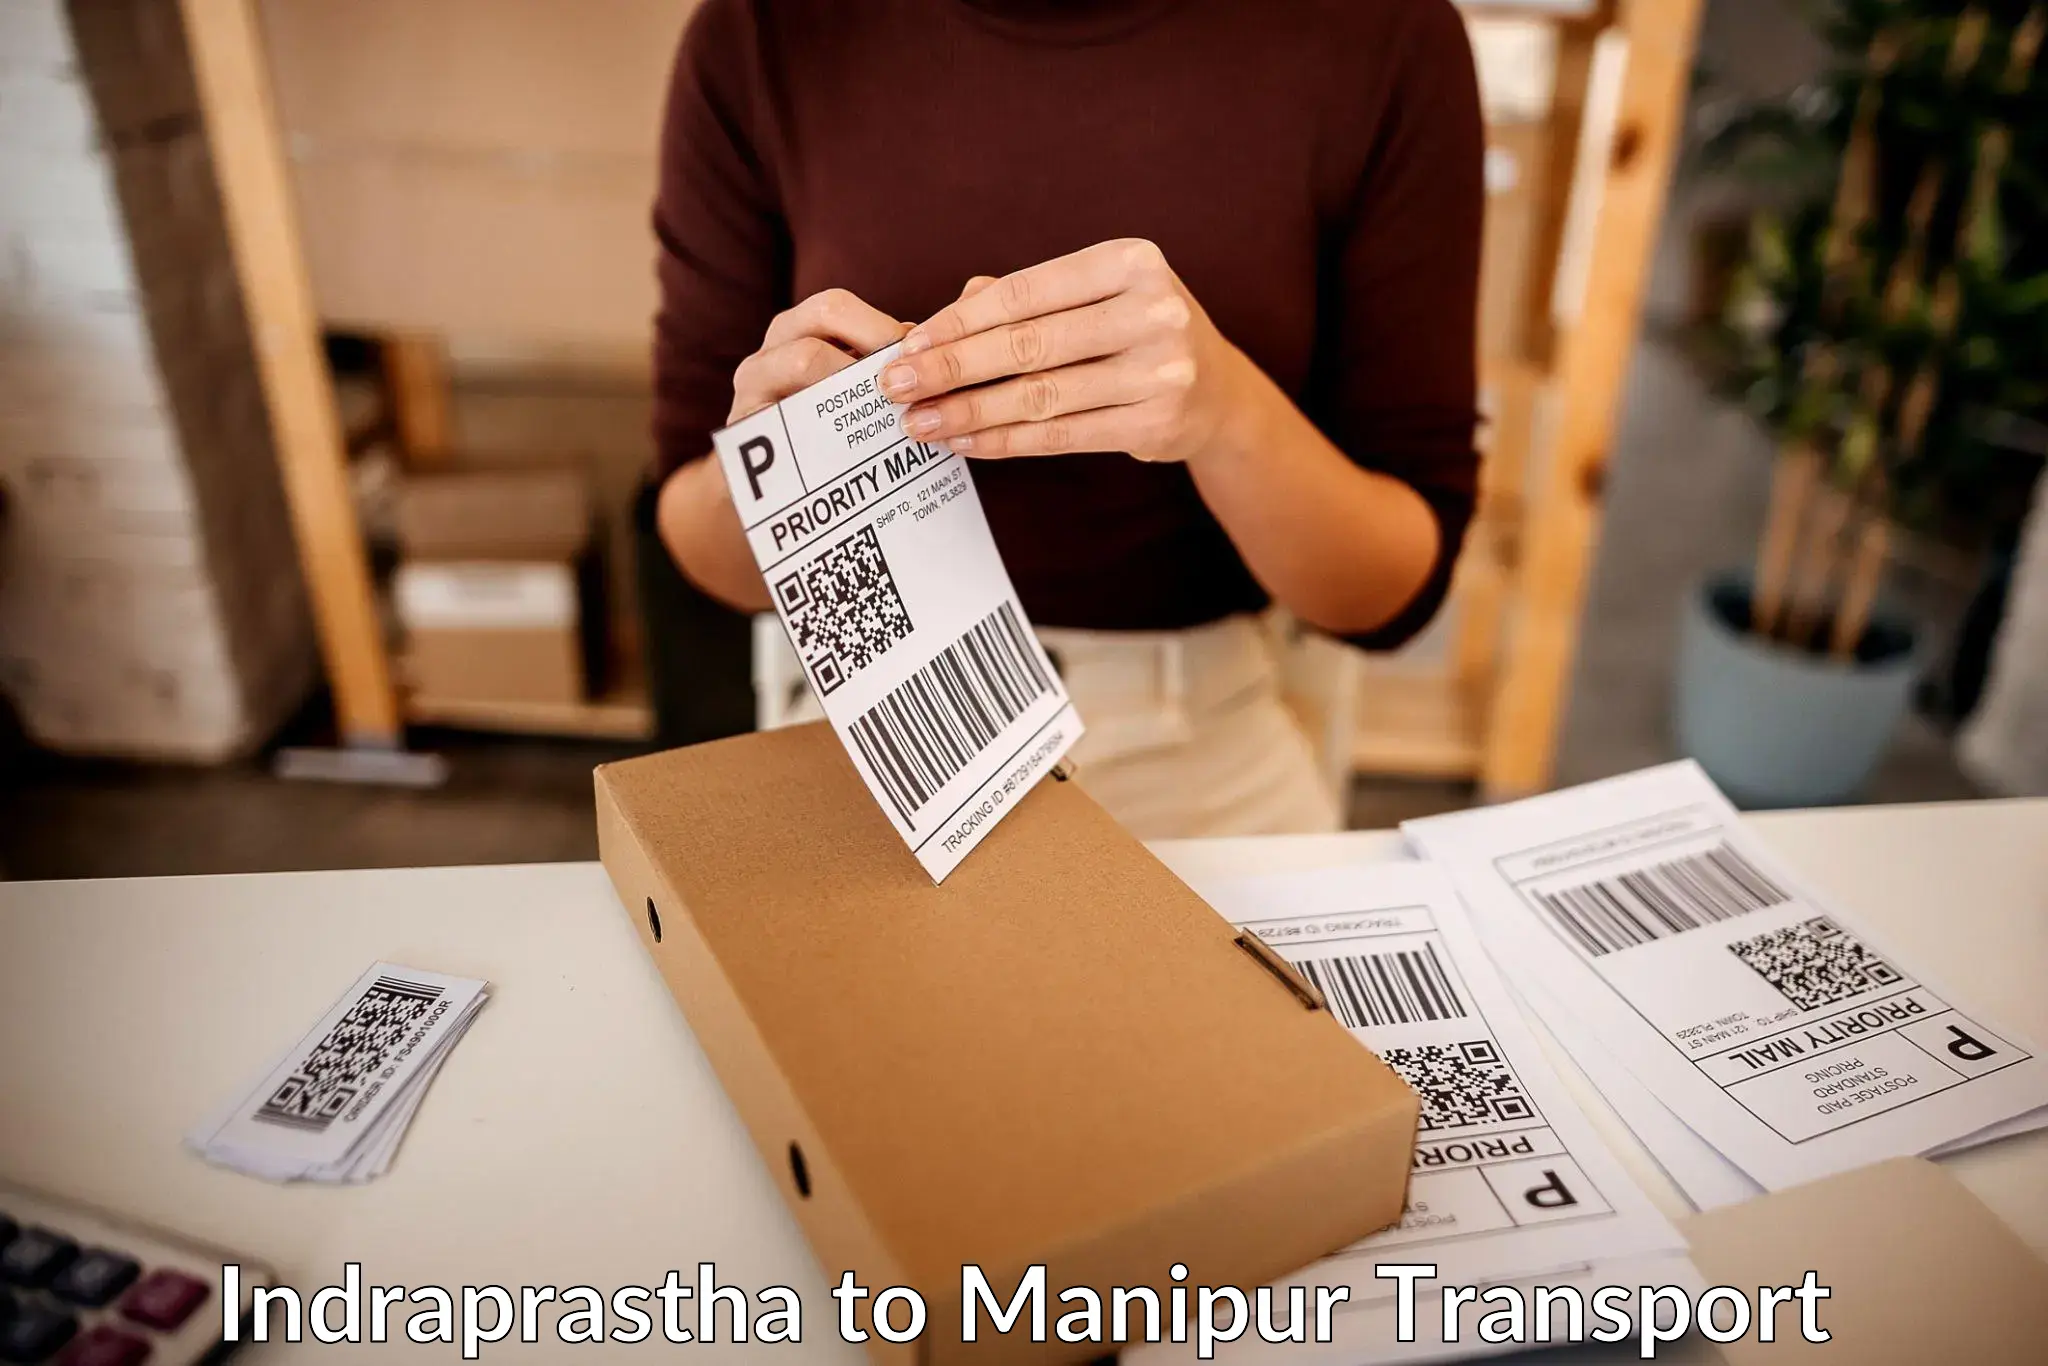 Goods delivery service Indraprastha to Manipur